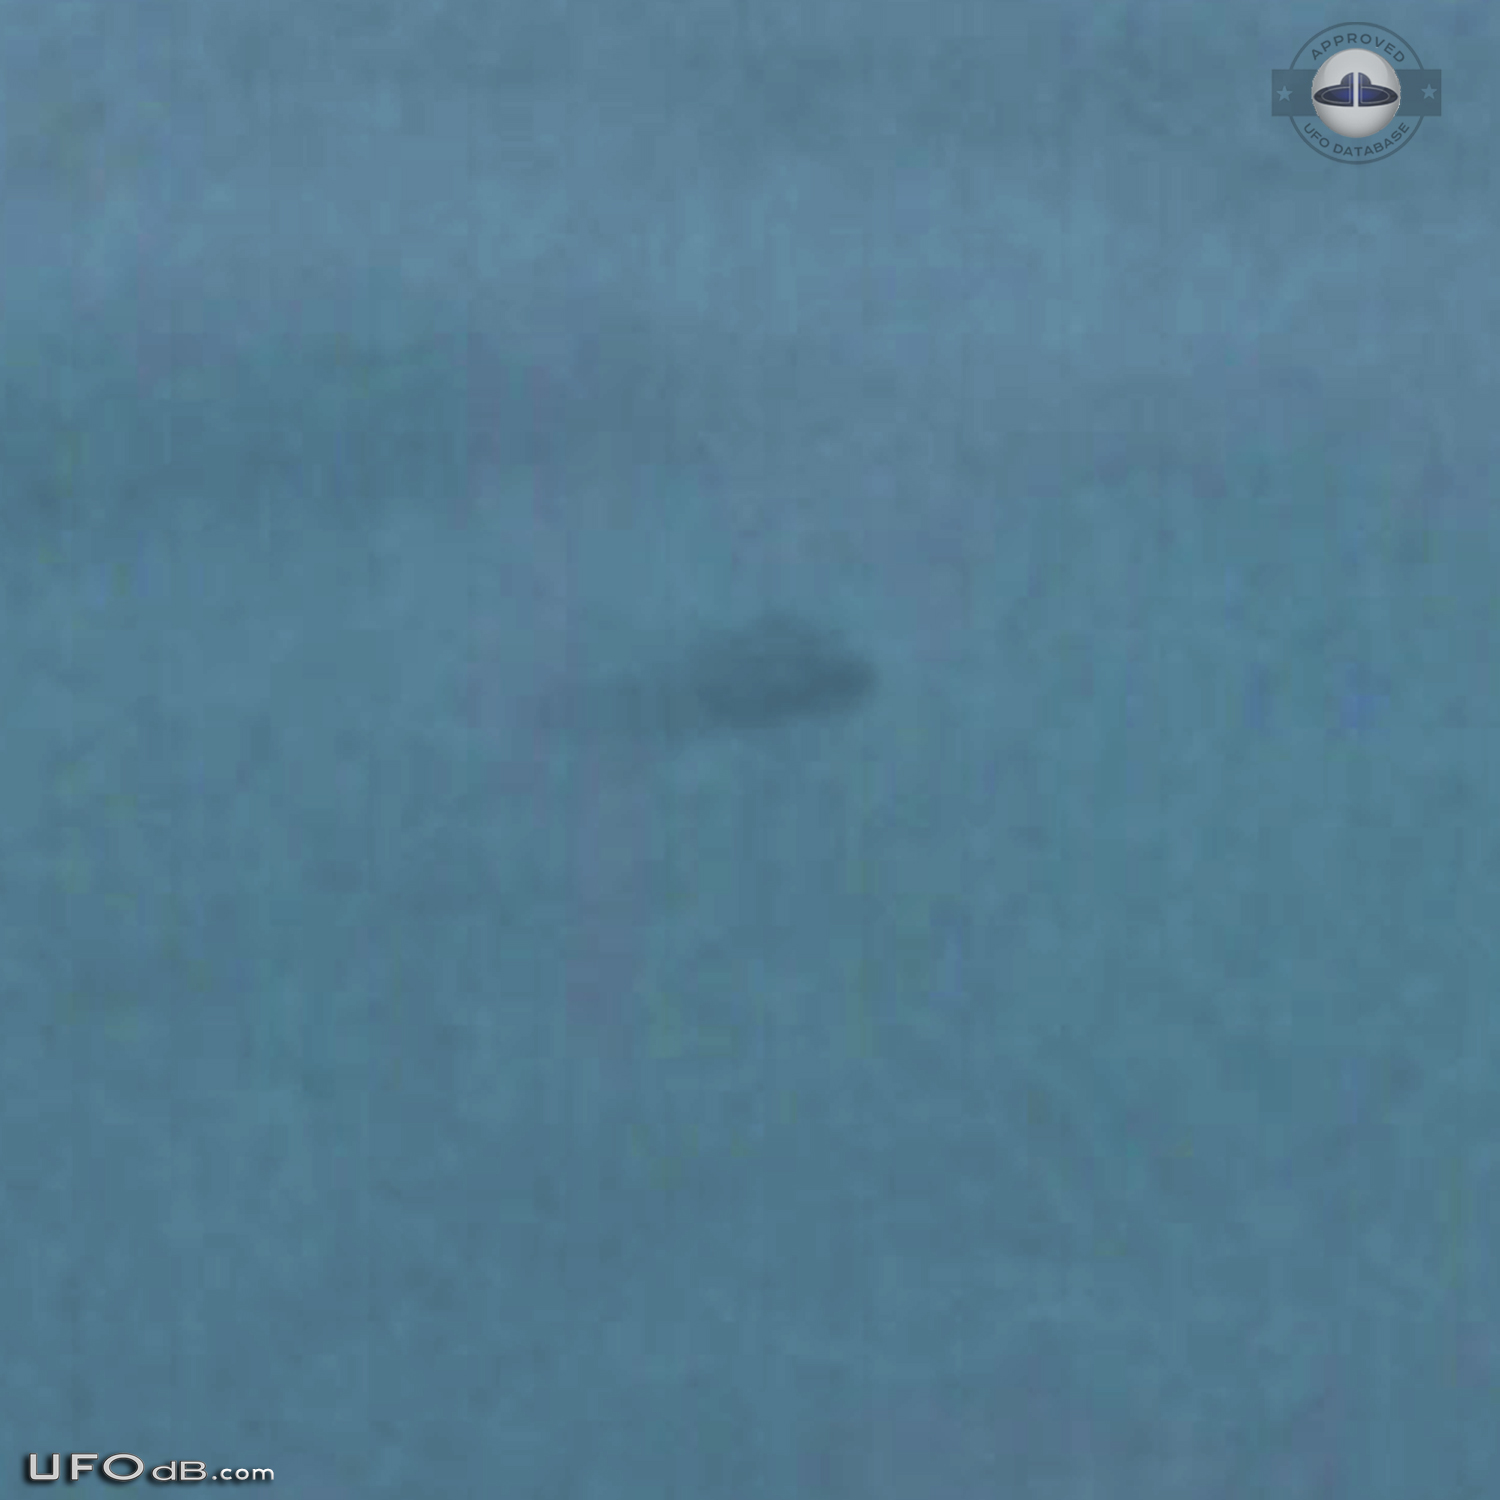 Cigar shaped UFO hiding in out of clouds in Farmington New Mexico USA UFO Picture #625-3